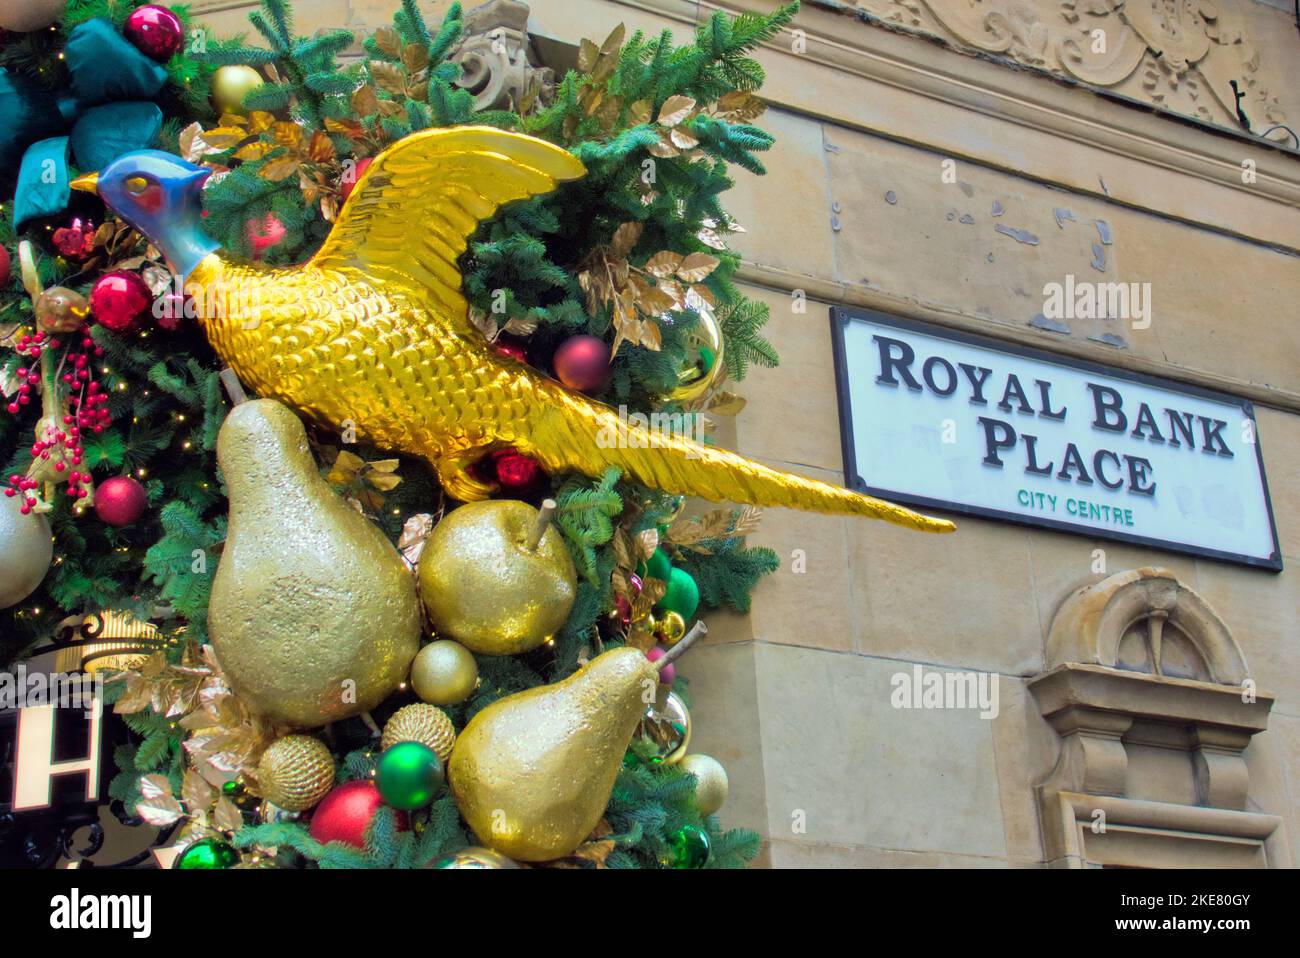 royal bank place street sign ivy restaurant Glasgow outside facade Christmas decoration close up Stock Photo